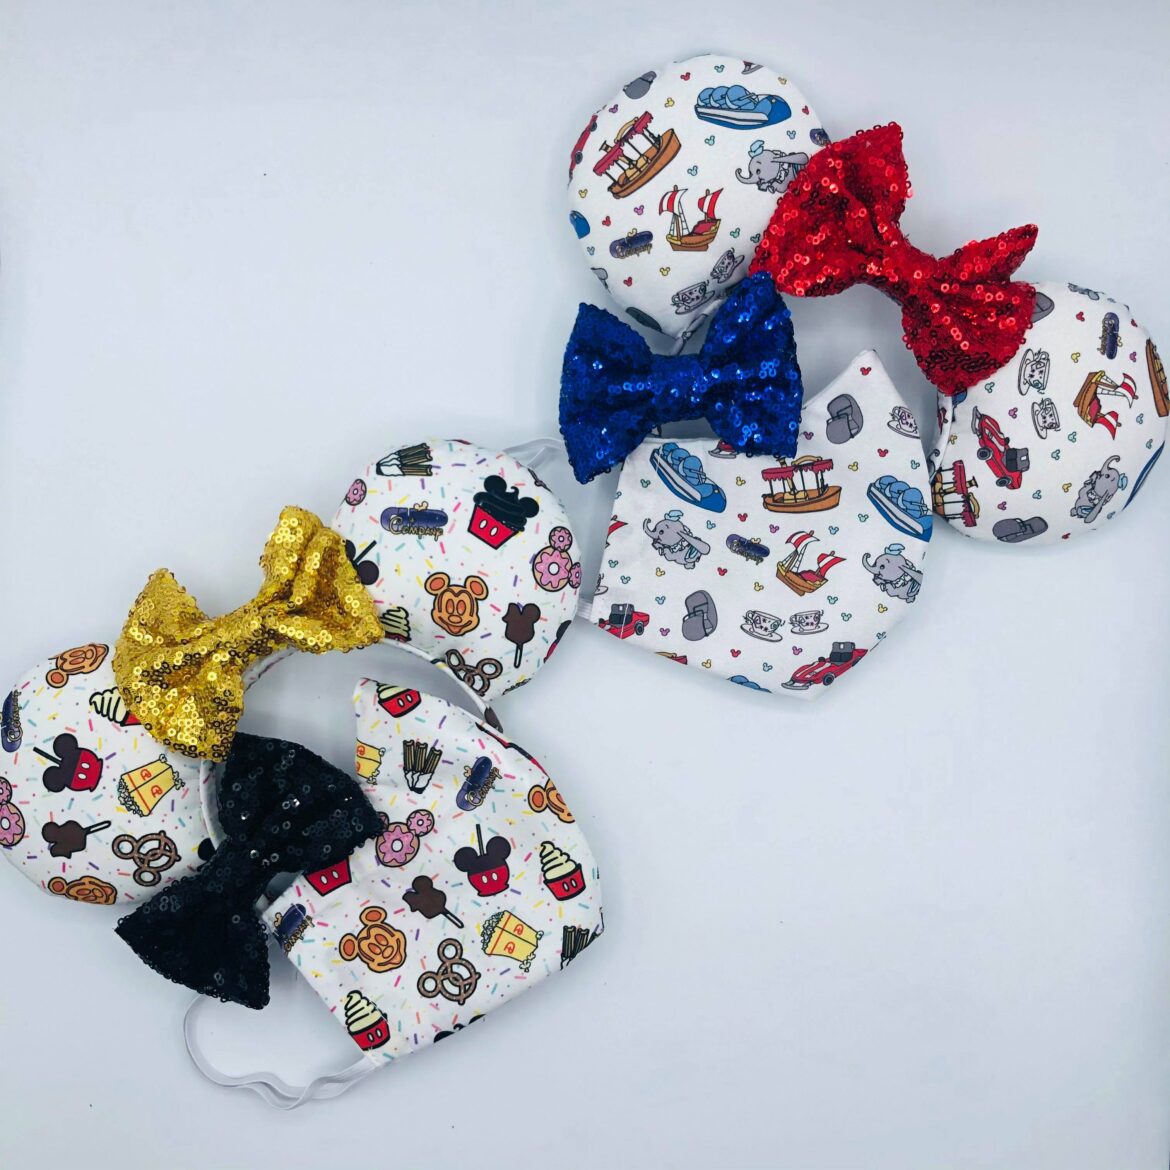 New Chip and Co Face Masks And Matching Minnie Ears!